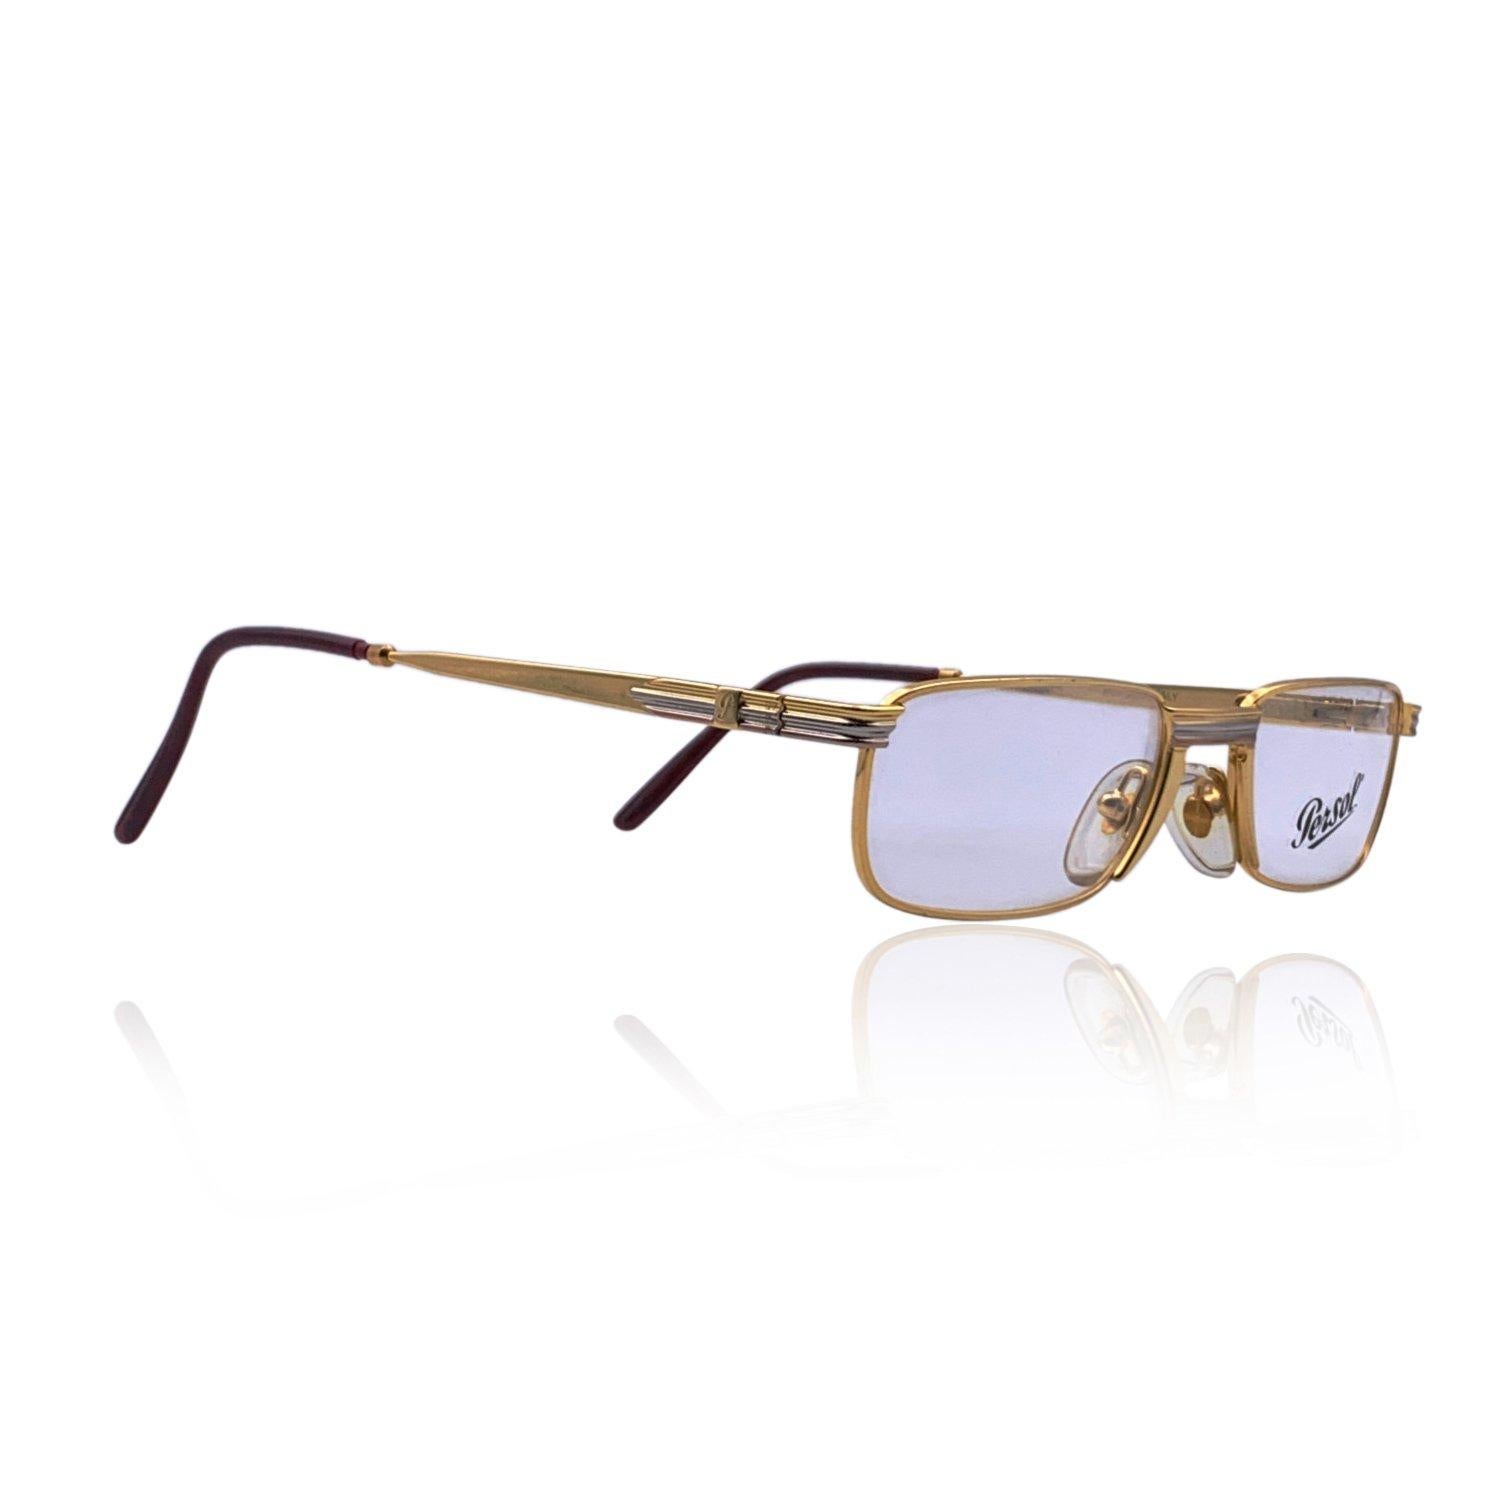 PERSOL Ratti Vintage Eyeglasses- Model: Landor. Gold metal frame with silver metal accents. Rectangular design. Clear demo lenses. Flexible temples. Made in Italy. Details MATERIAL: Acetate COLOR: Gold MODEL: Landor GENDER: Unisex Adults COUNTRY OF